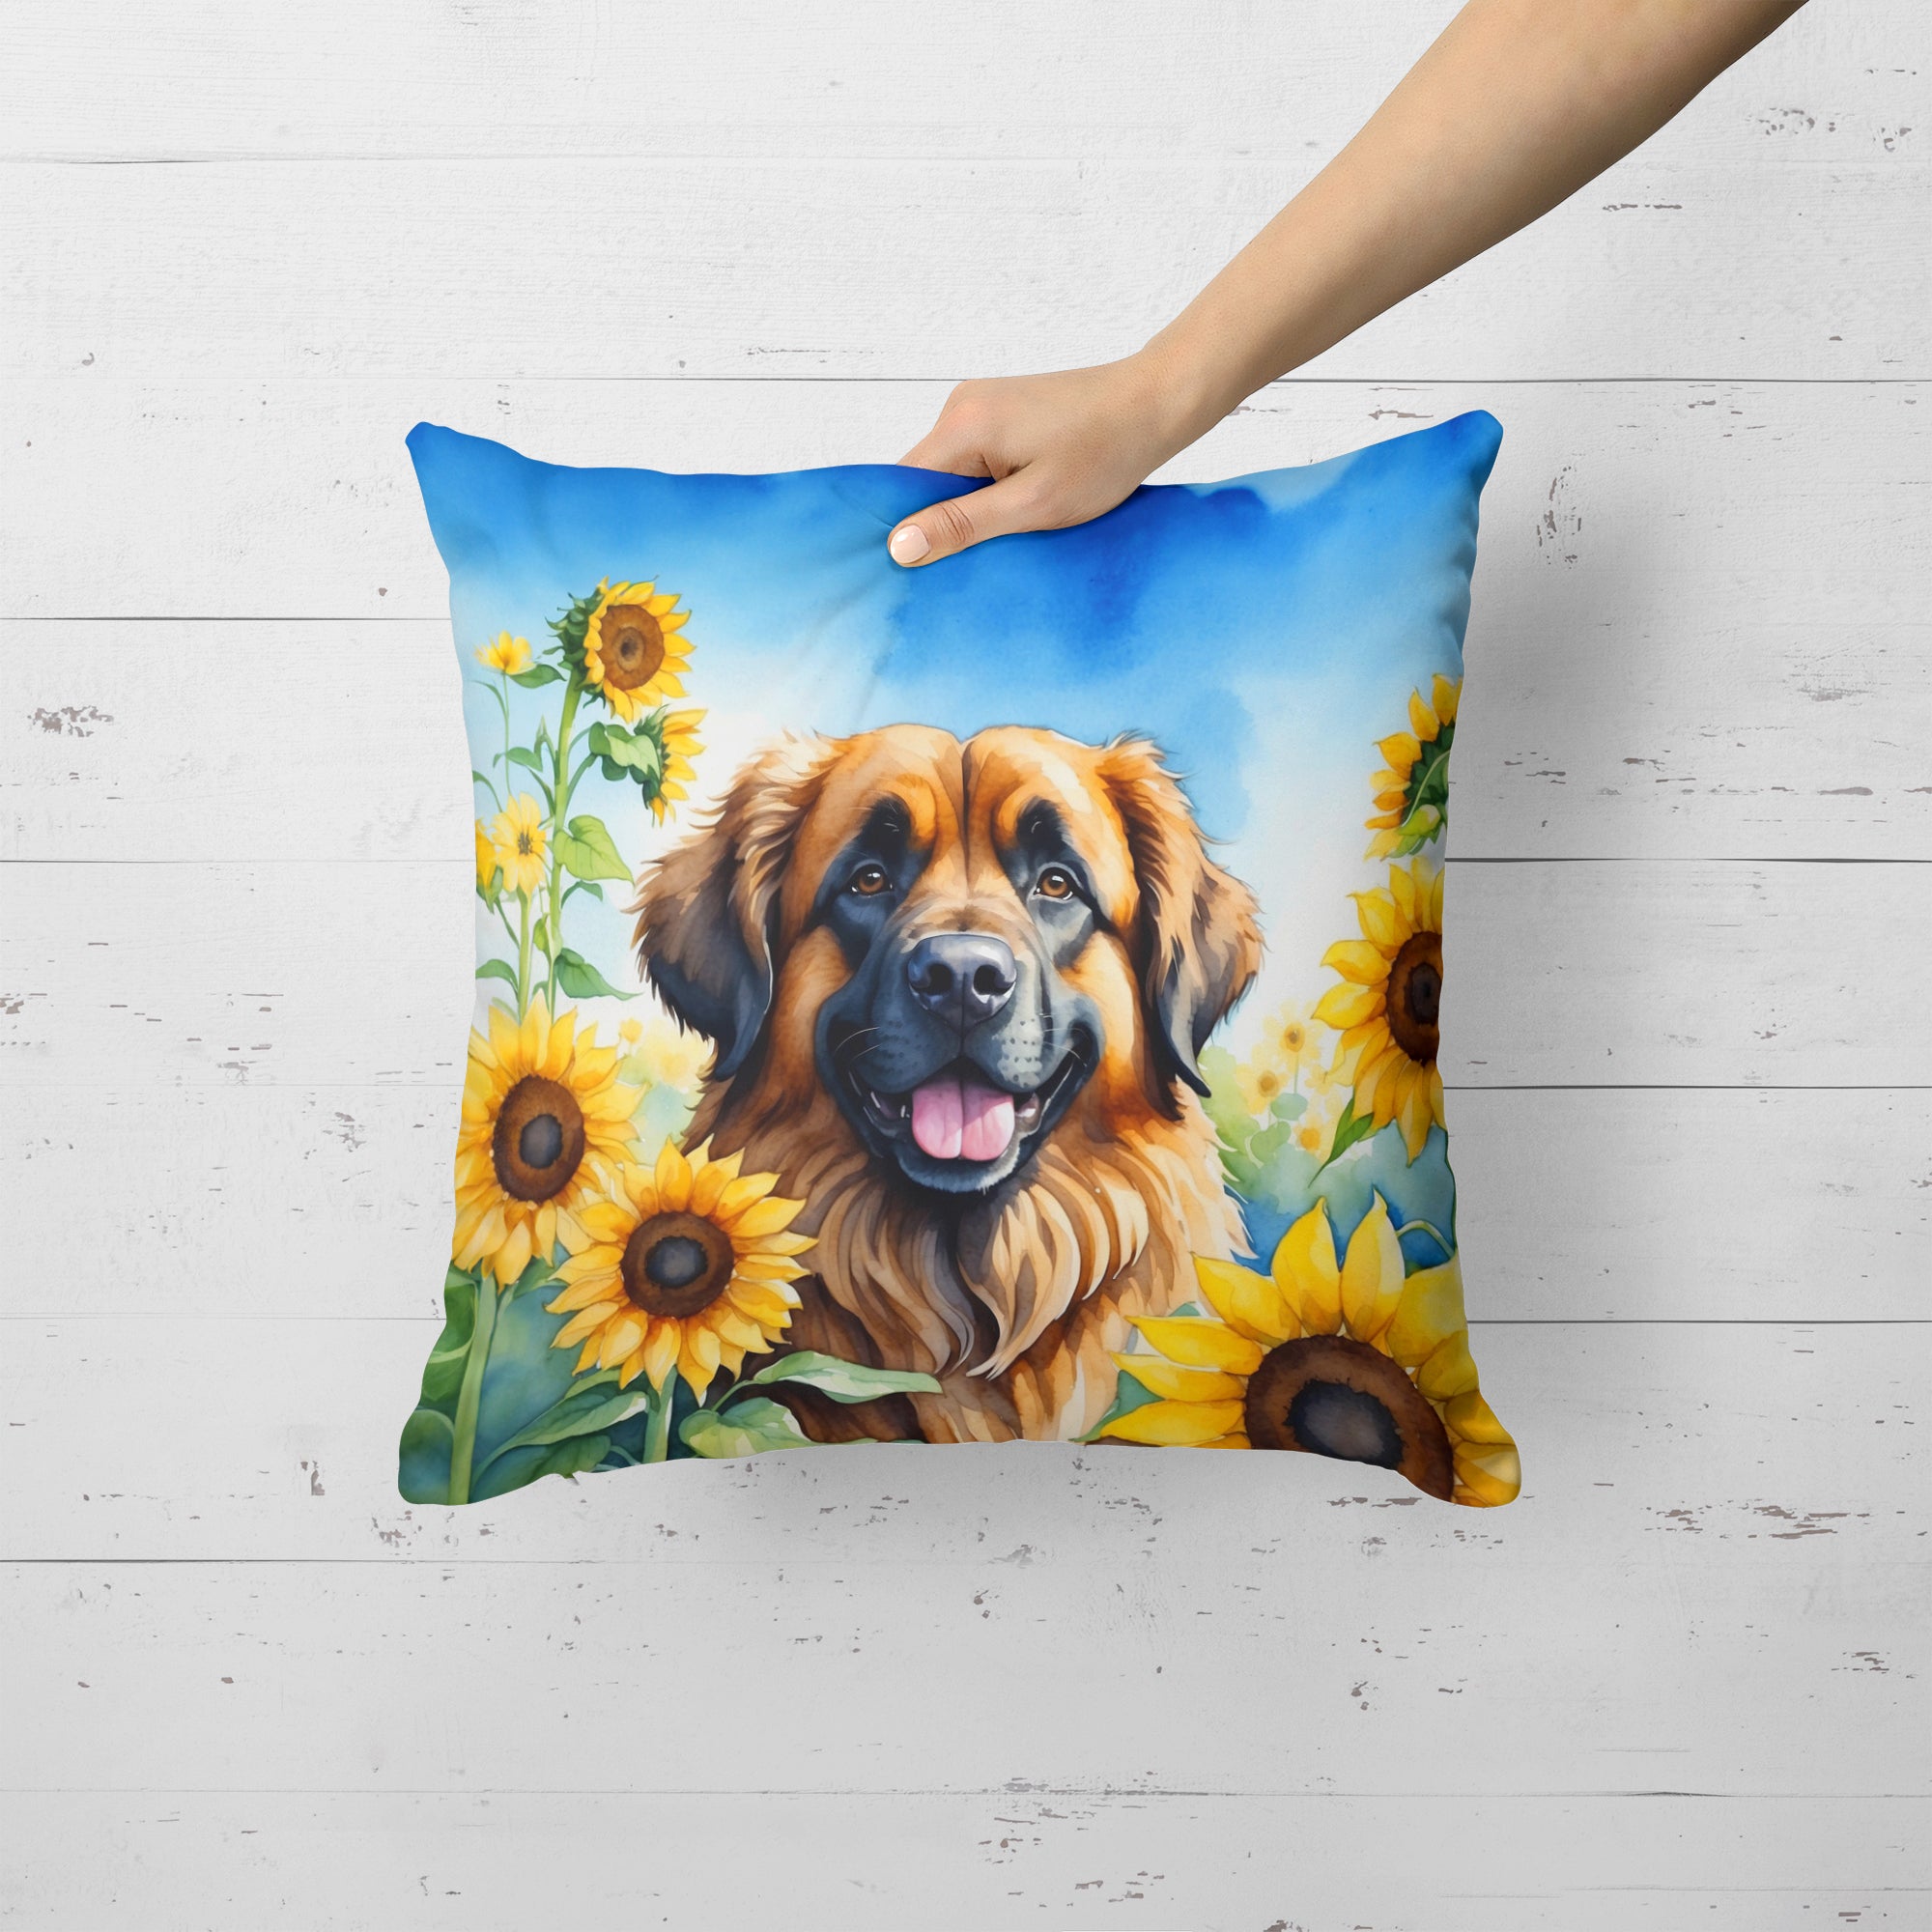 Buy this Leonberger in Sunflowers Throw Pillow